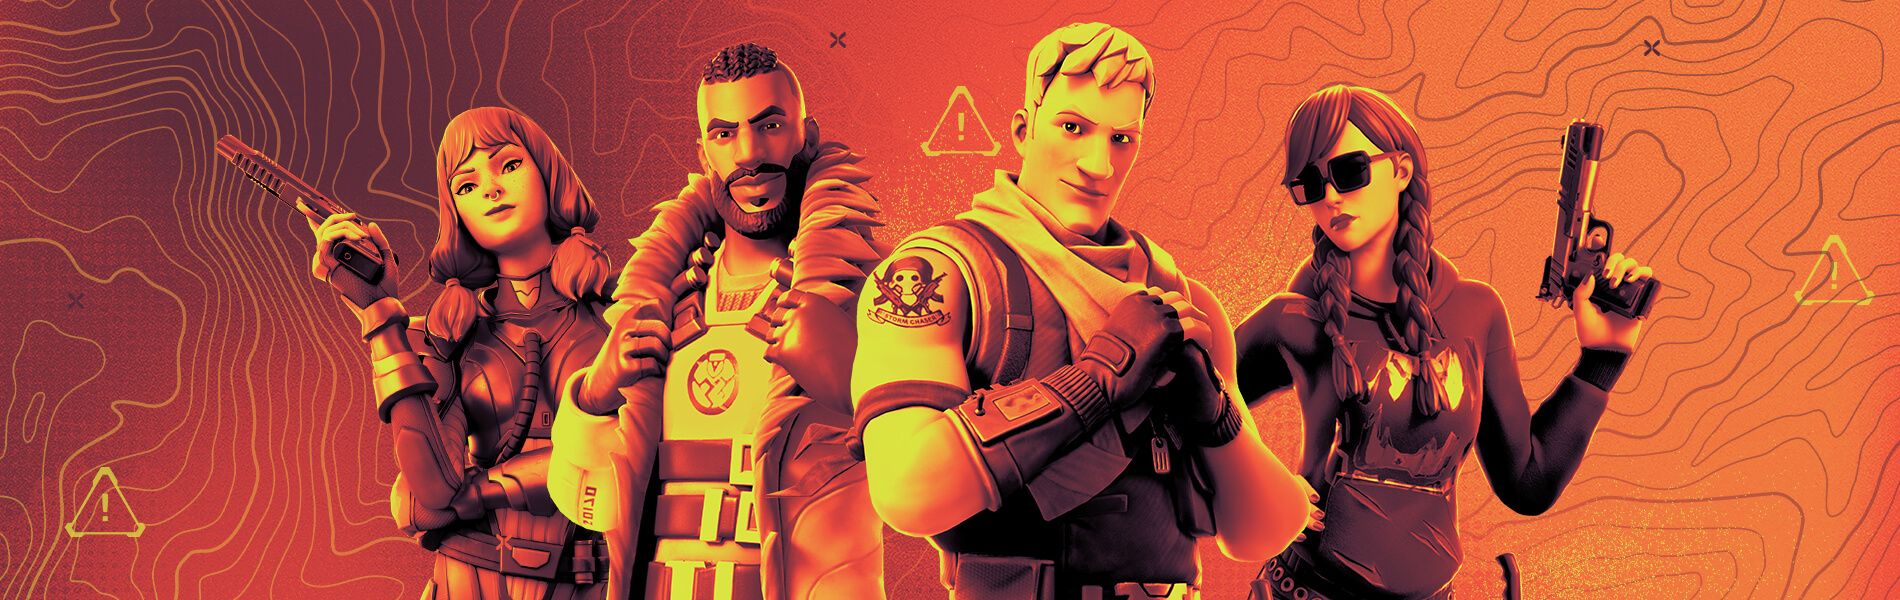 Fortnite characters in promo art for the new Zero Build mode